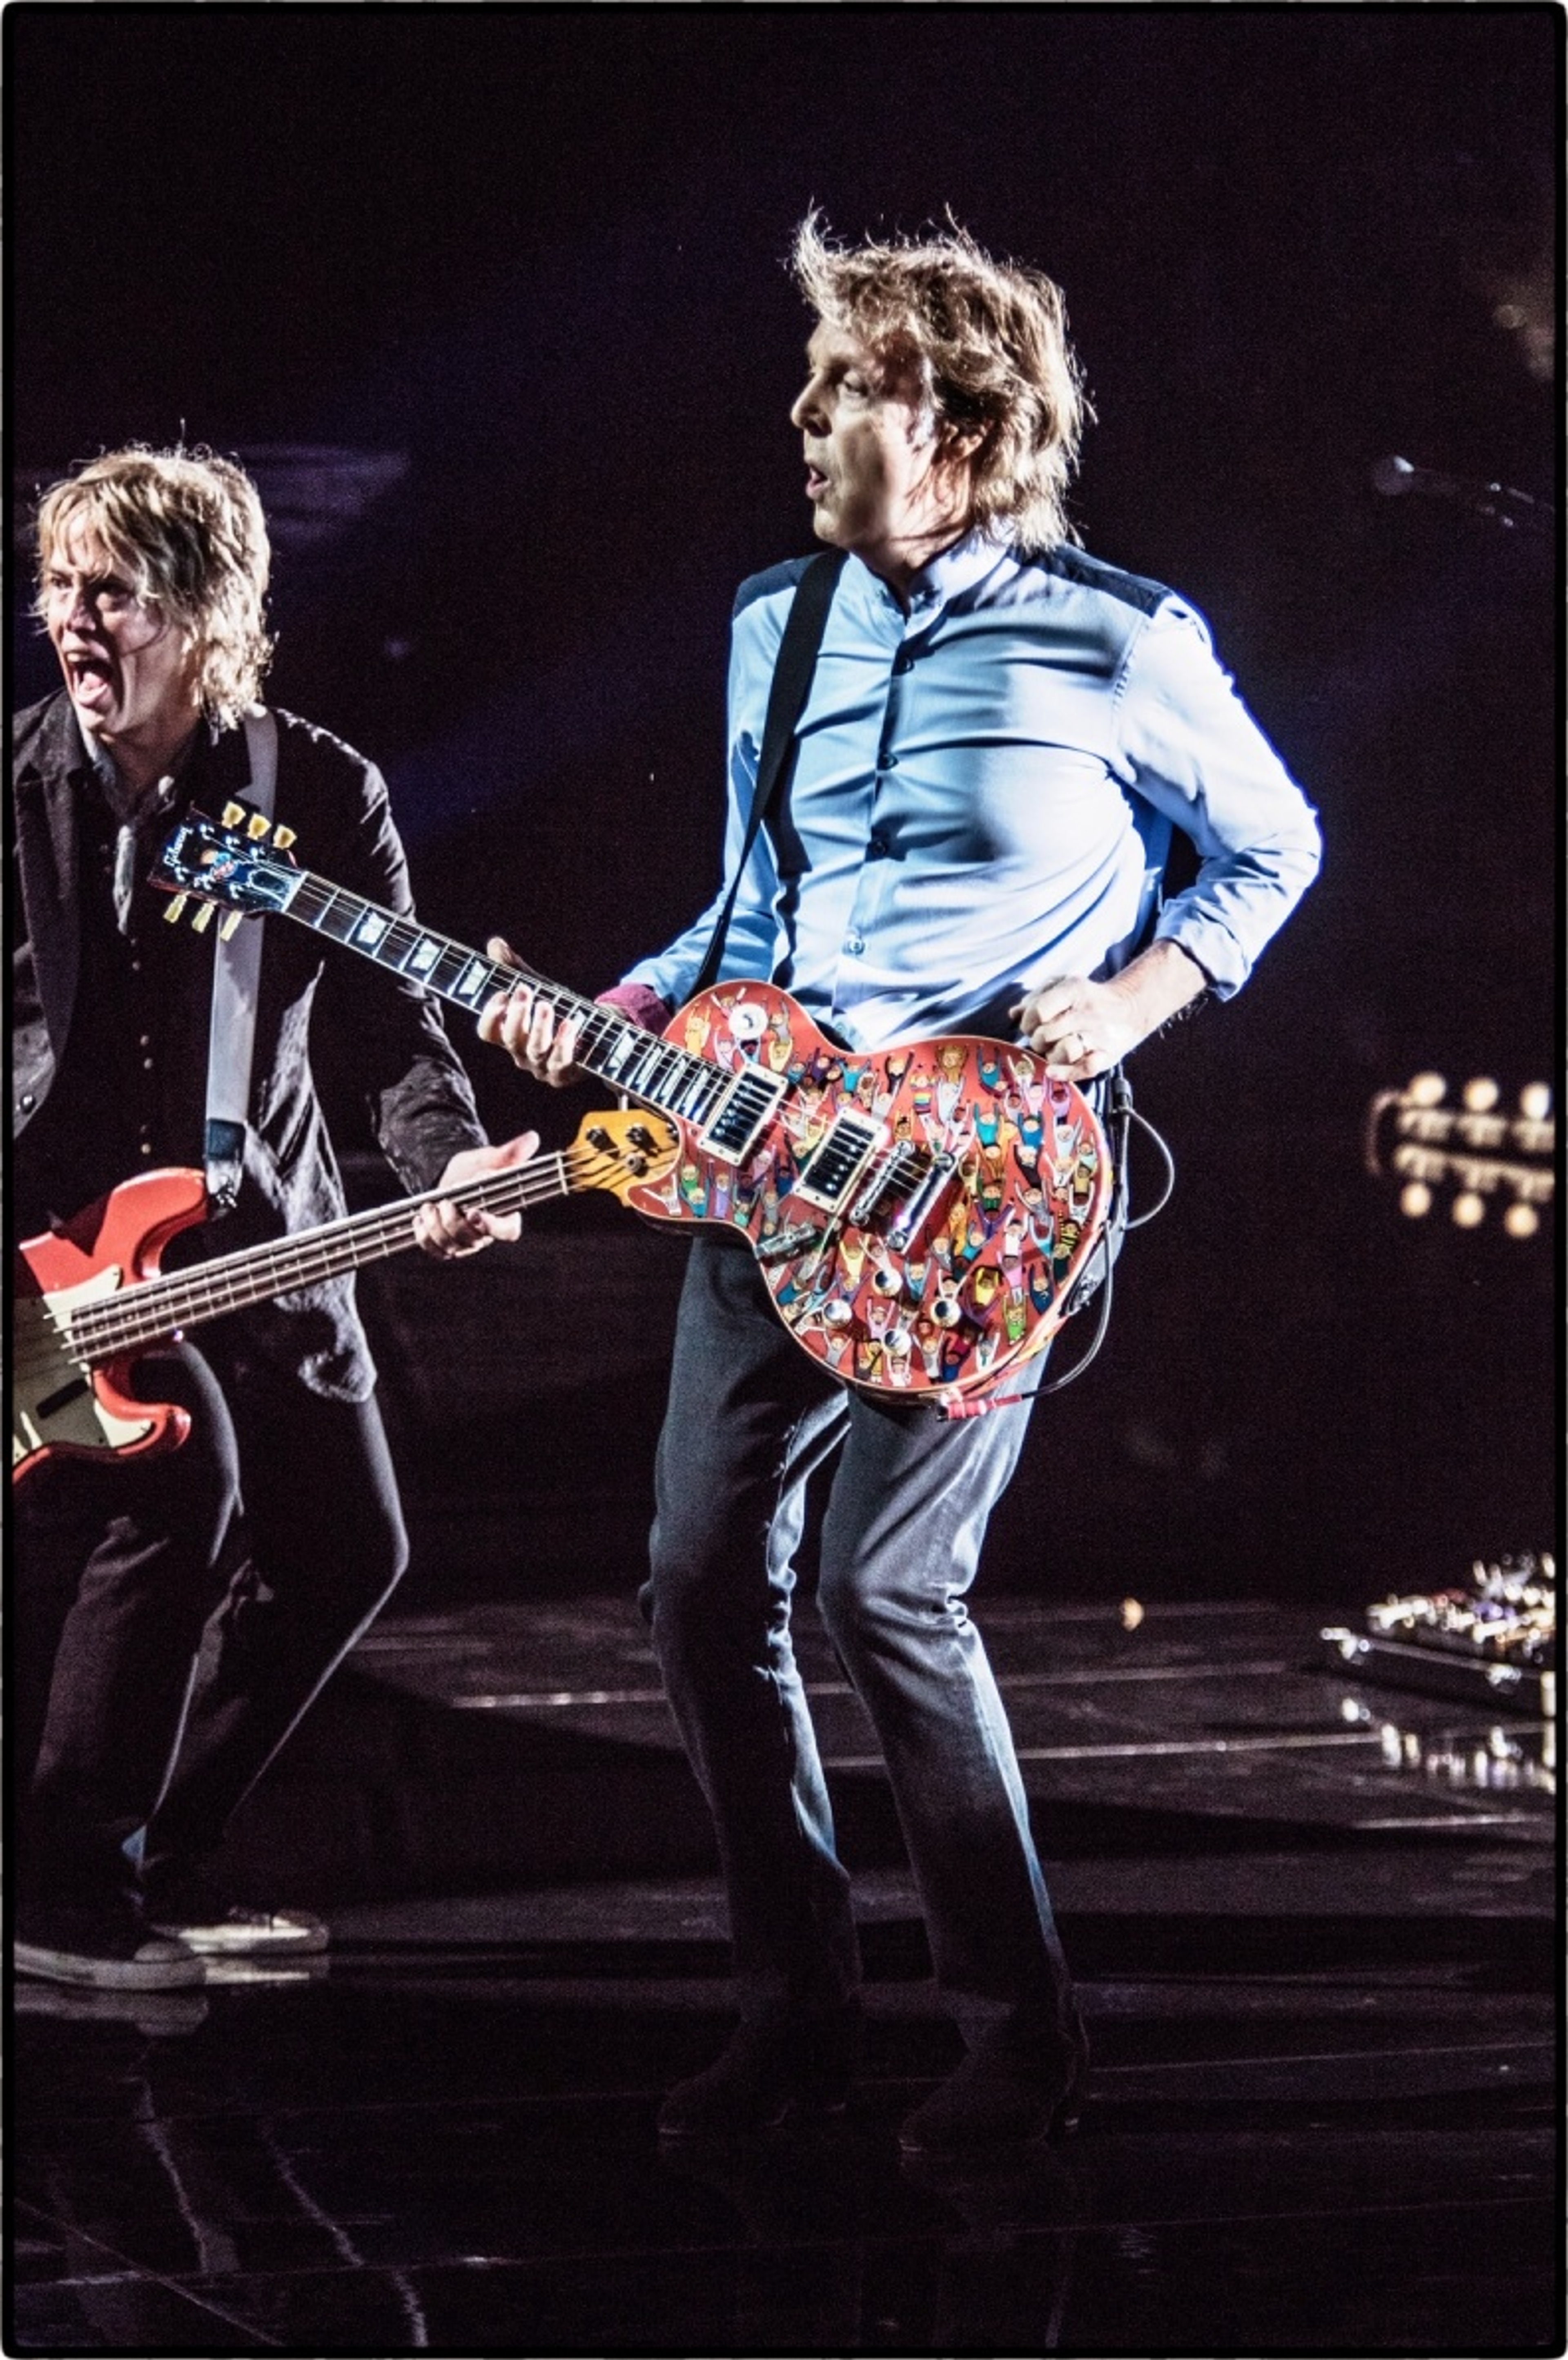 Paul playing his hand painted Gibson Les Paul Guitar in Sao Paulo, 15th October 2017